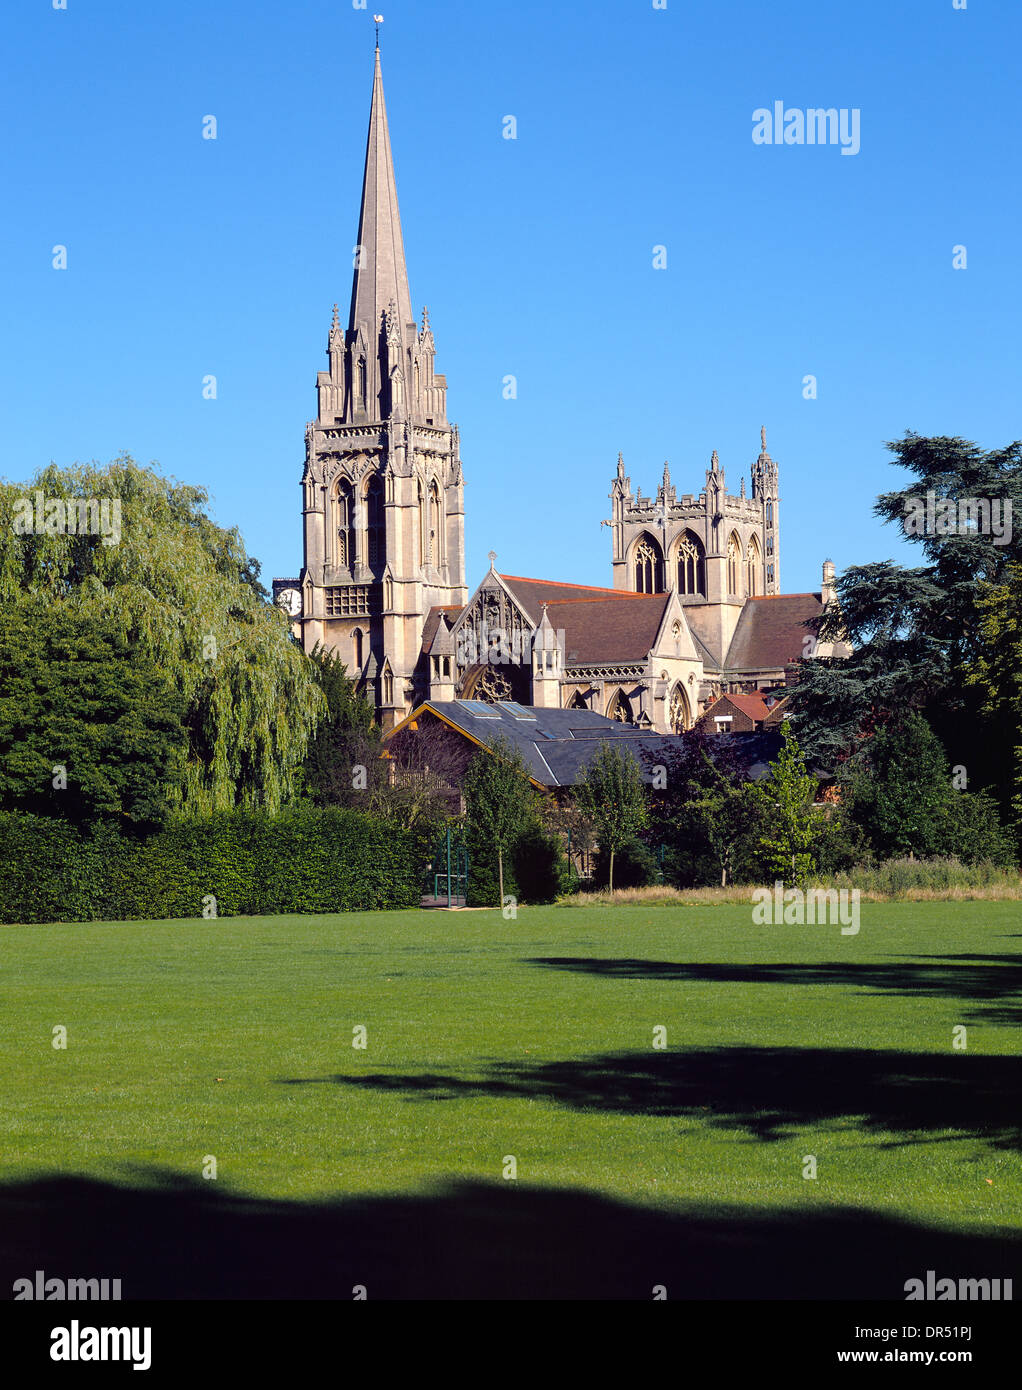 The tower and spire of the Catholic church of Our Lady & English Martyrs, Cambridge, UK. It was built in 1885 in the Gothic Revival style Stock Photo